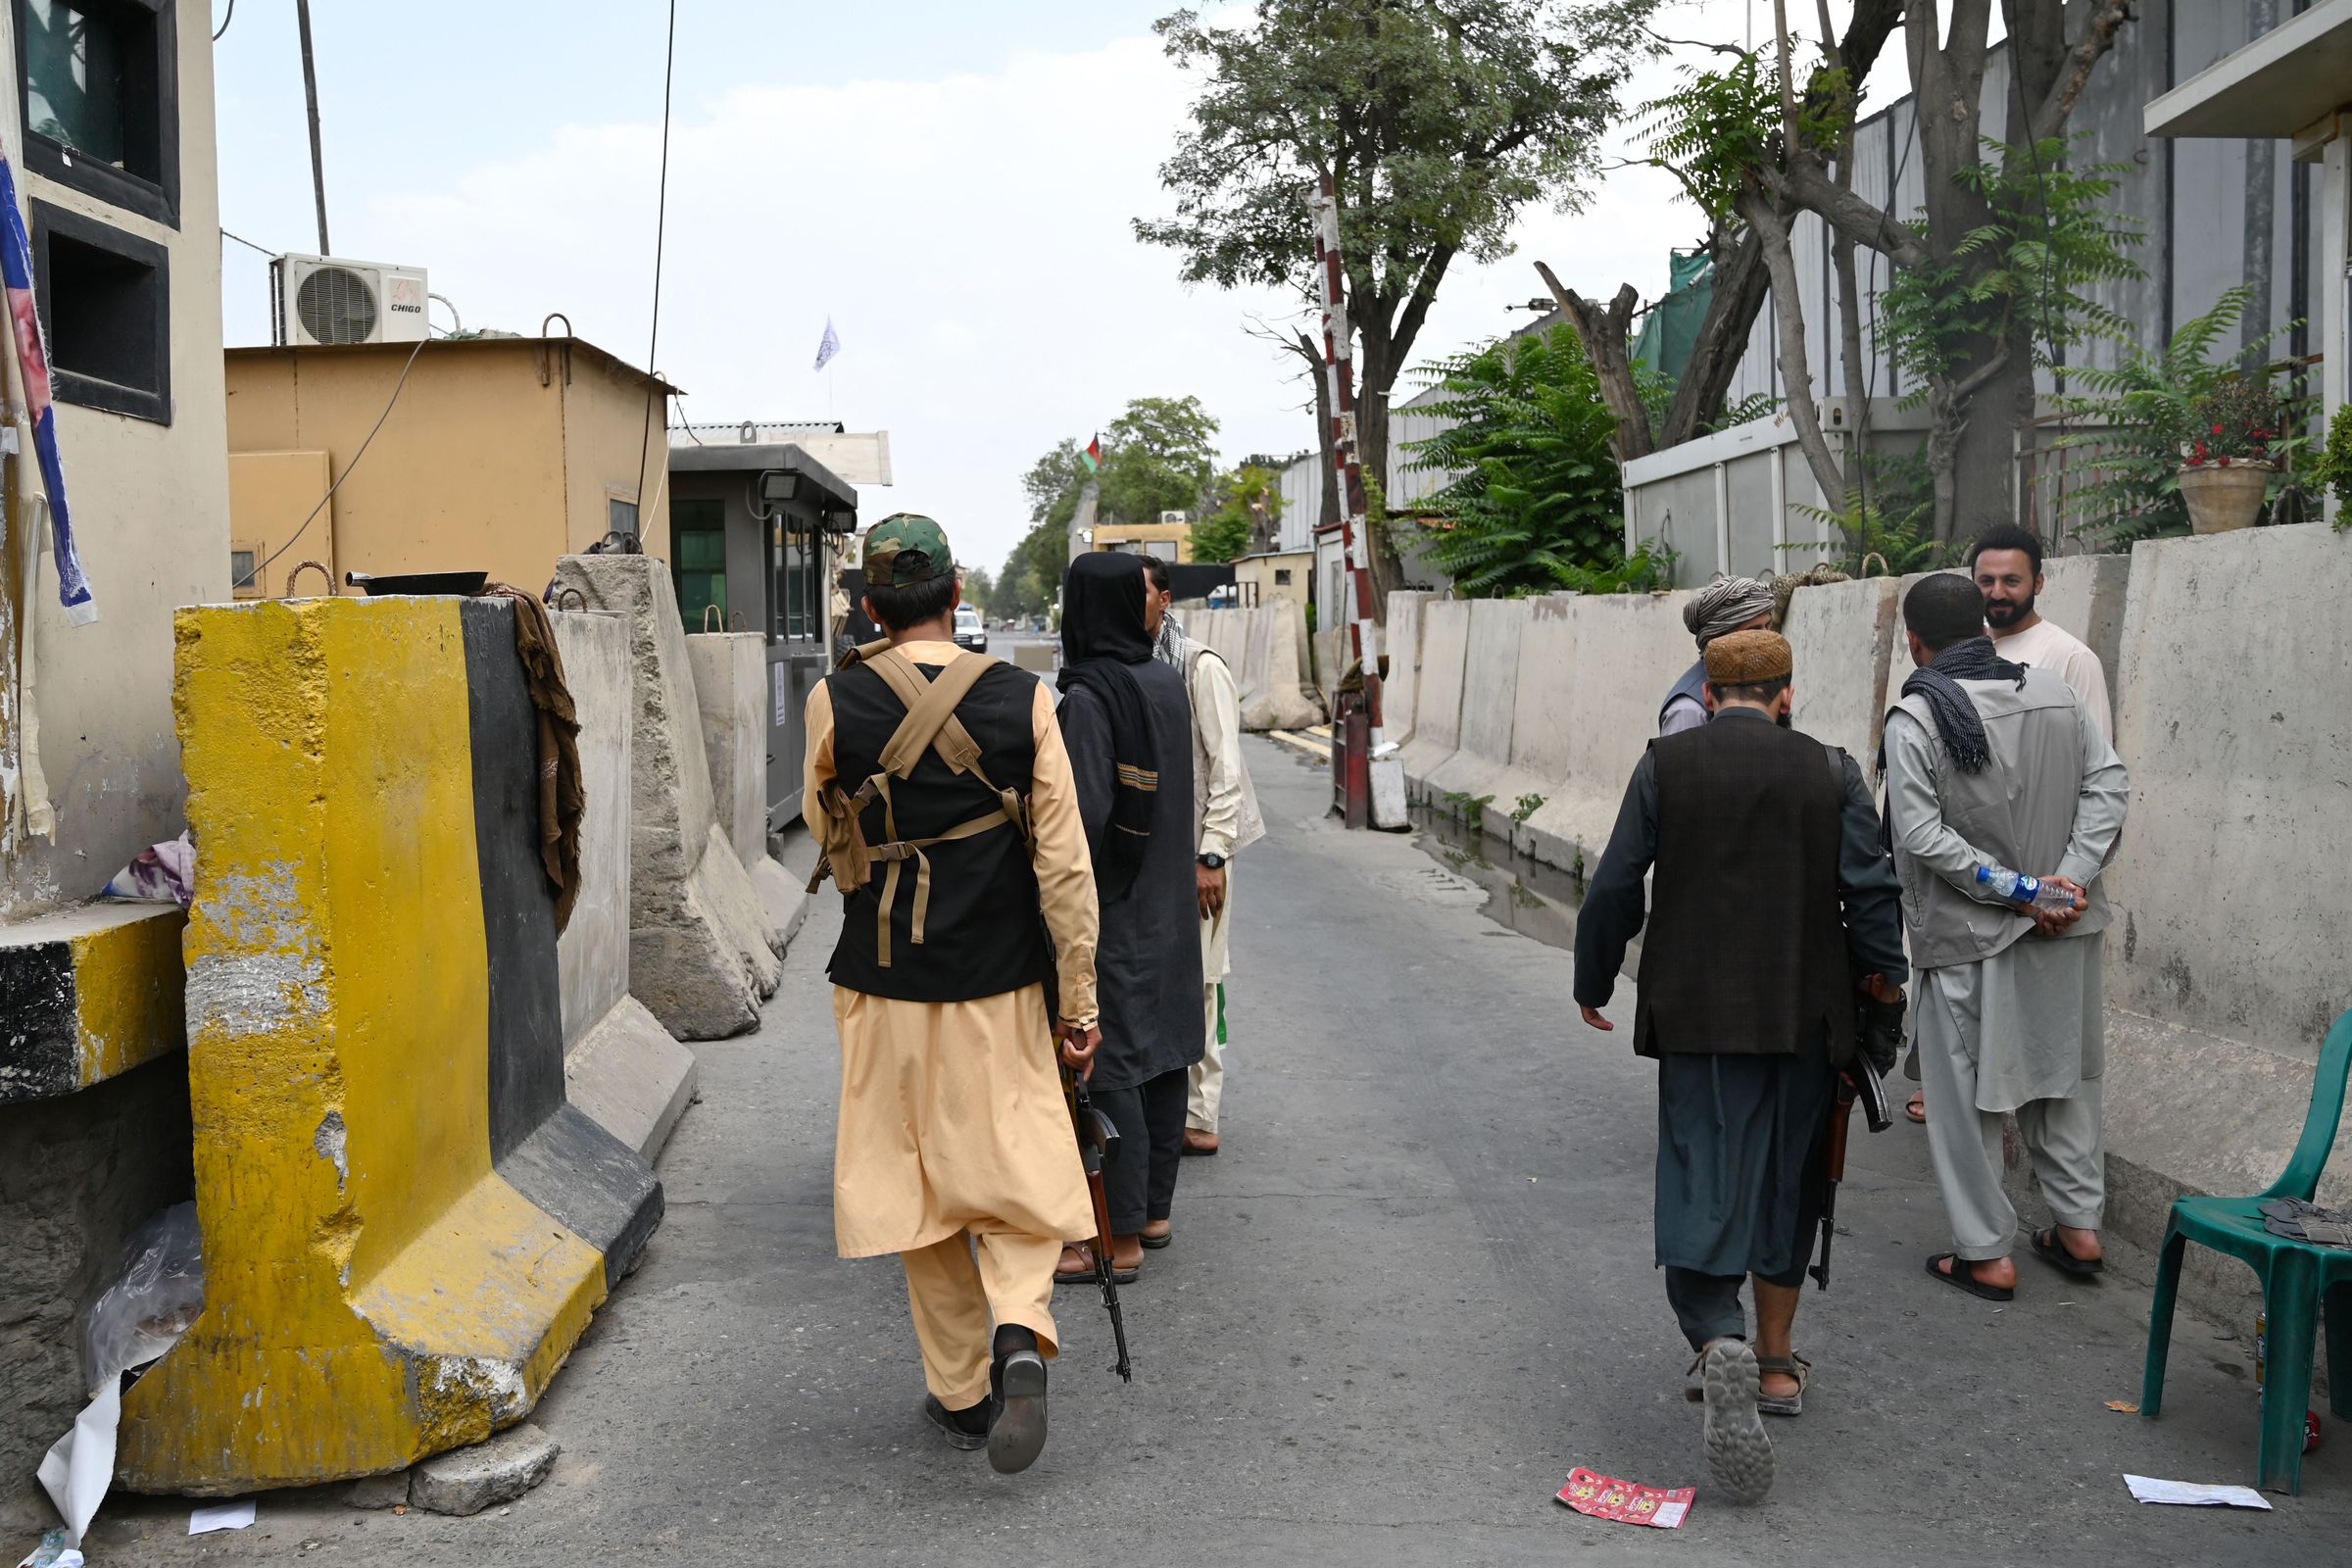 Four men facing away from the camera carry military rifles along an empty street, flanked by concrete barriers.